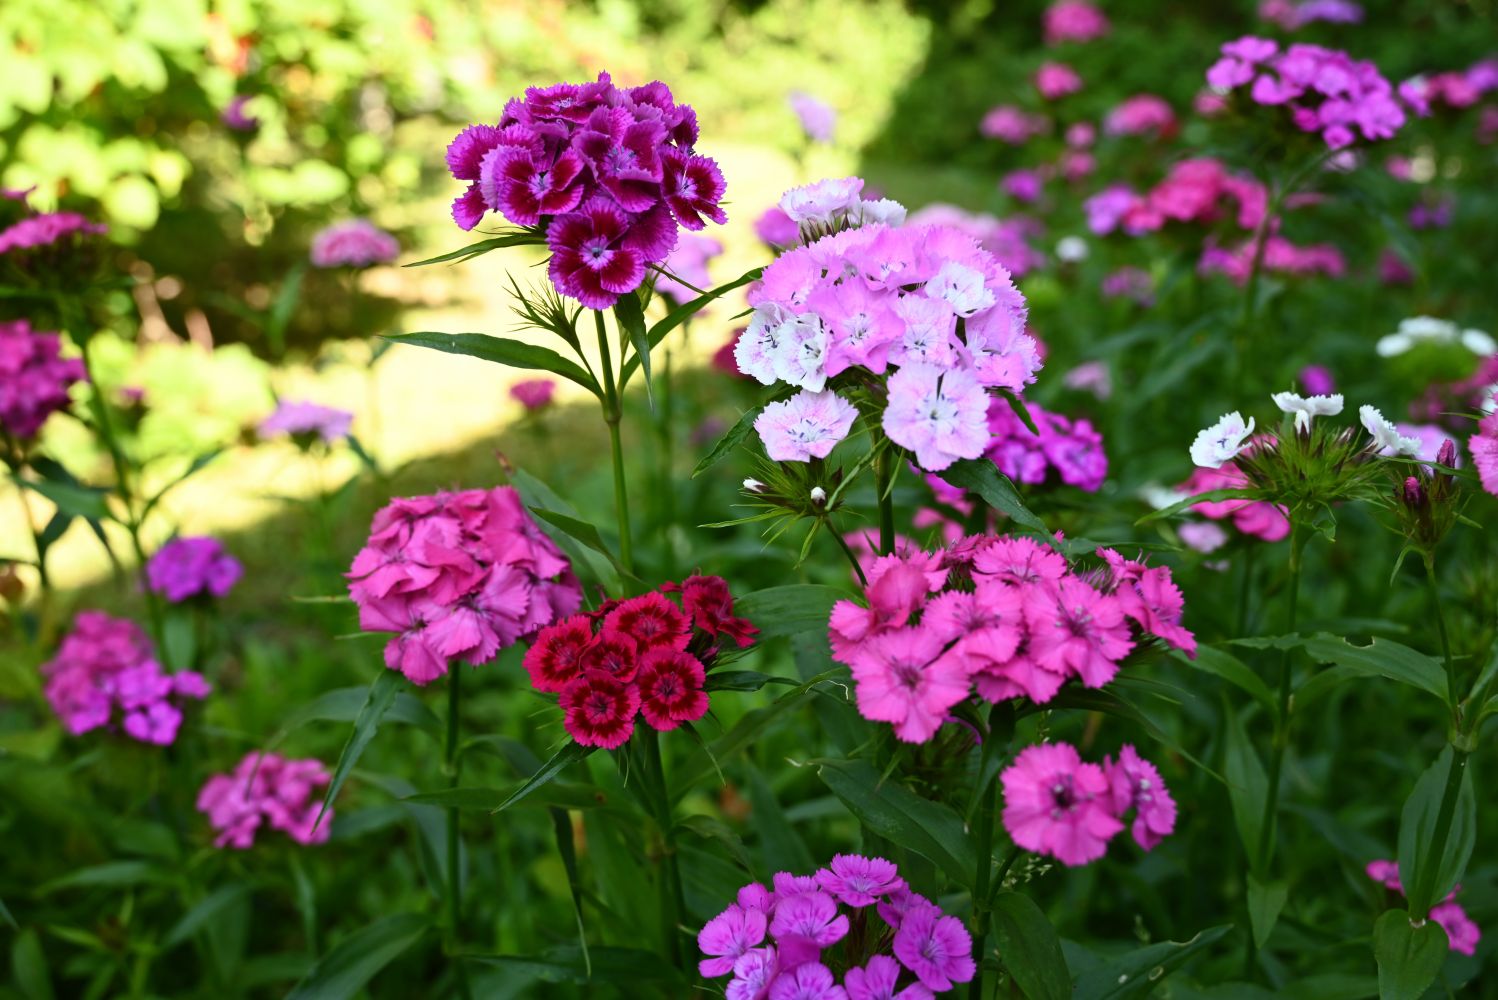 Dianthus: How To Care For The Sweet William Flower, 40% OFF